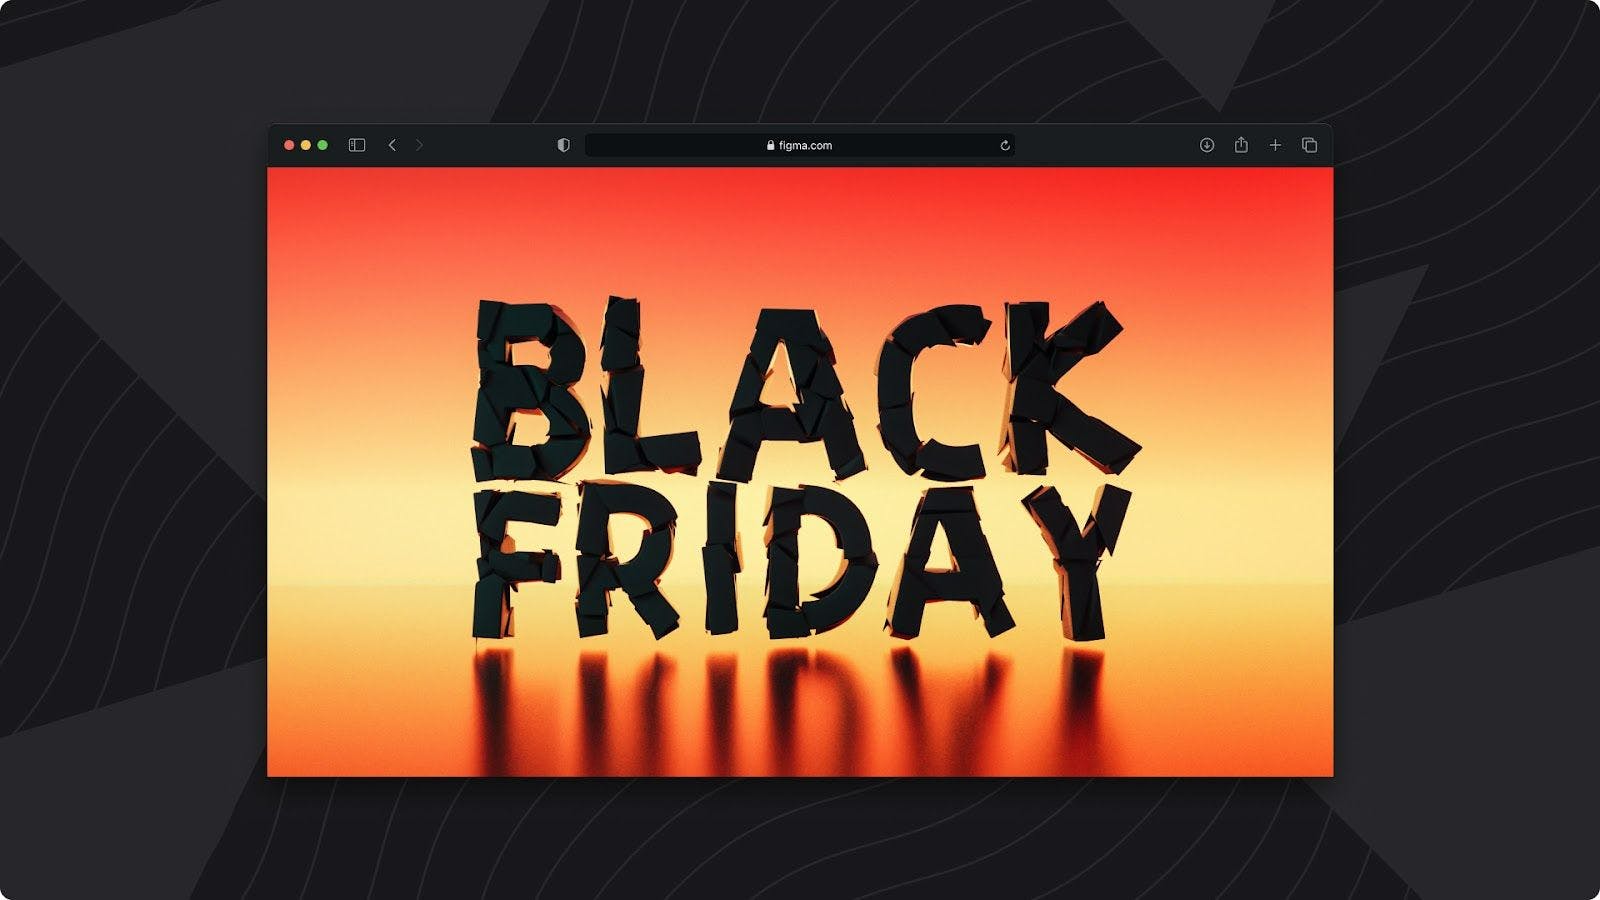 Black Friday: The Ultimate Guide to E-commerce's Biggest Shopping Event